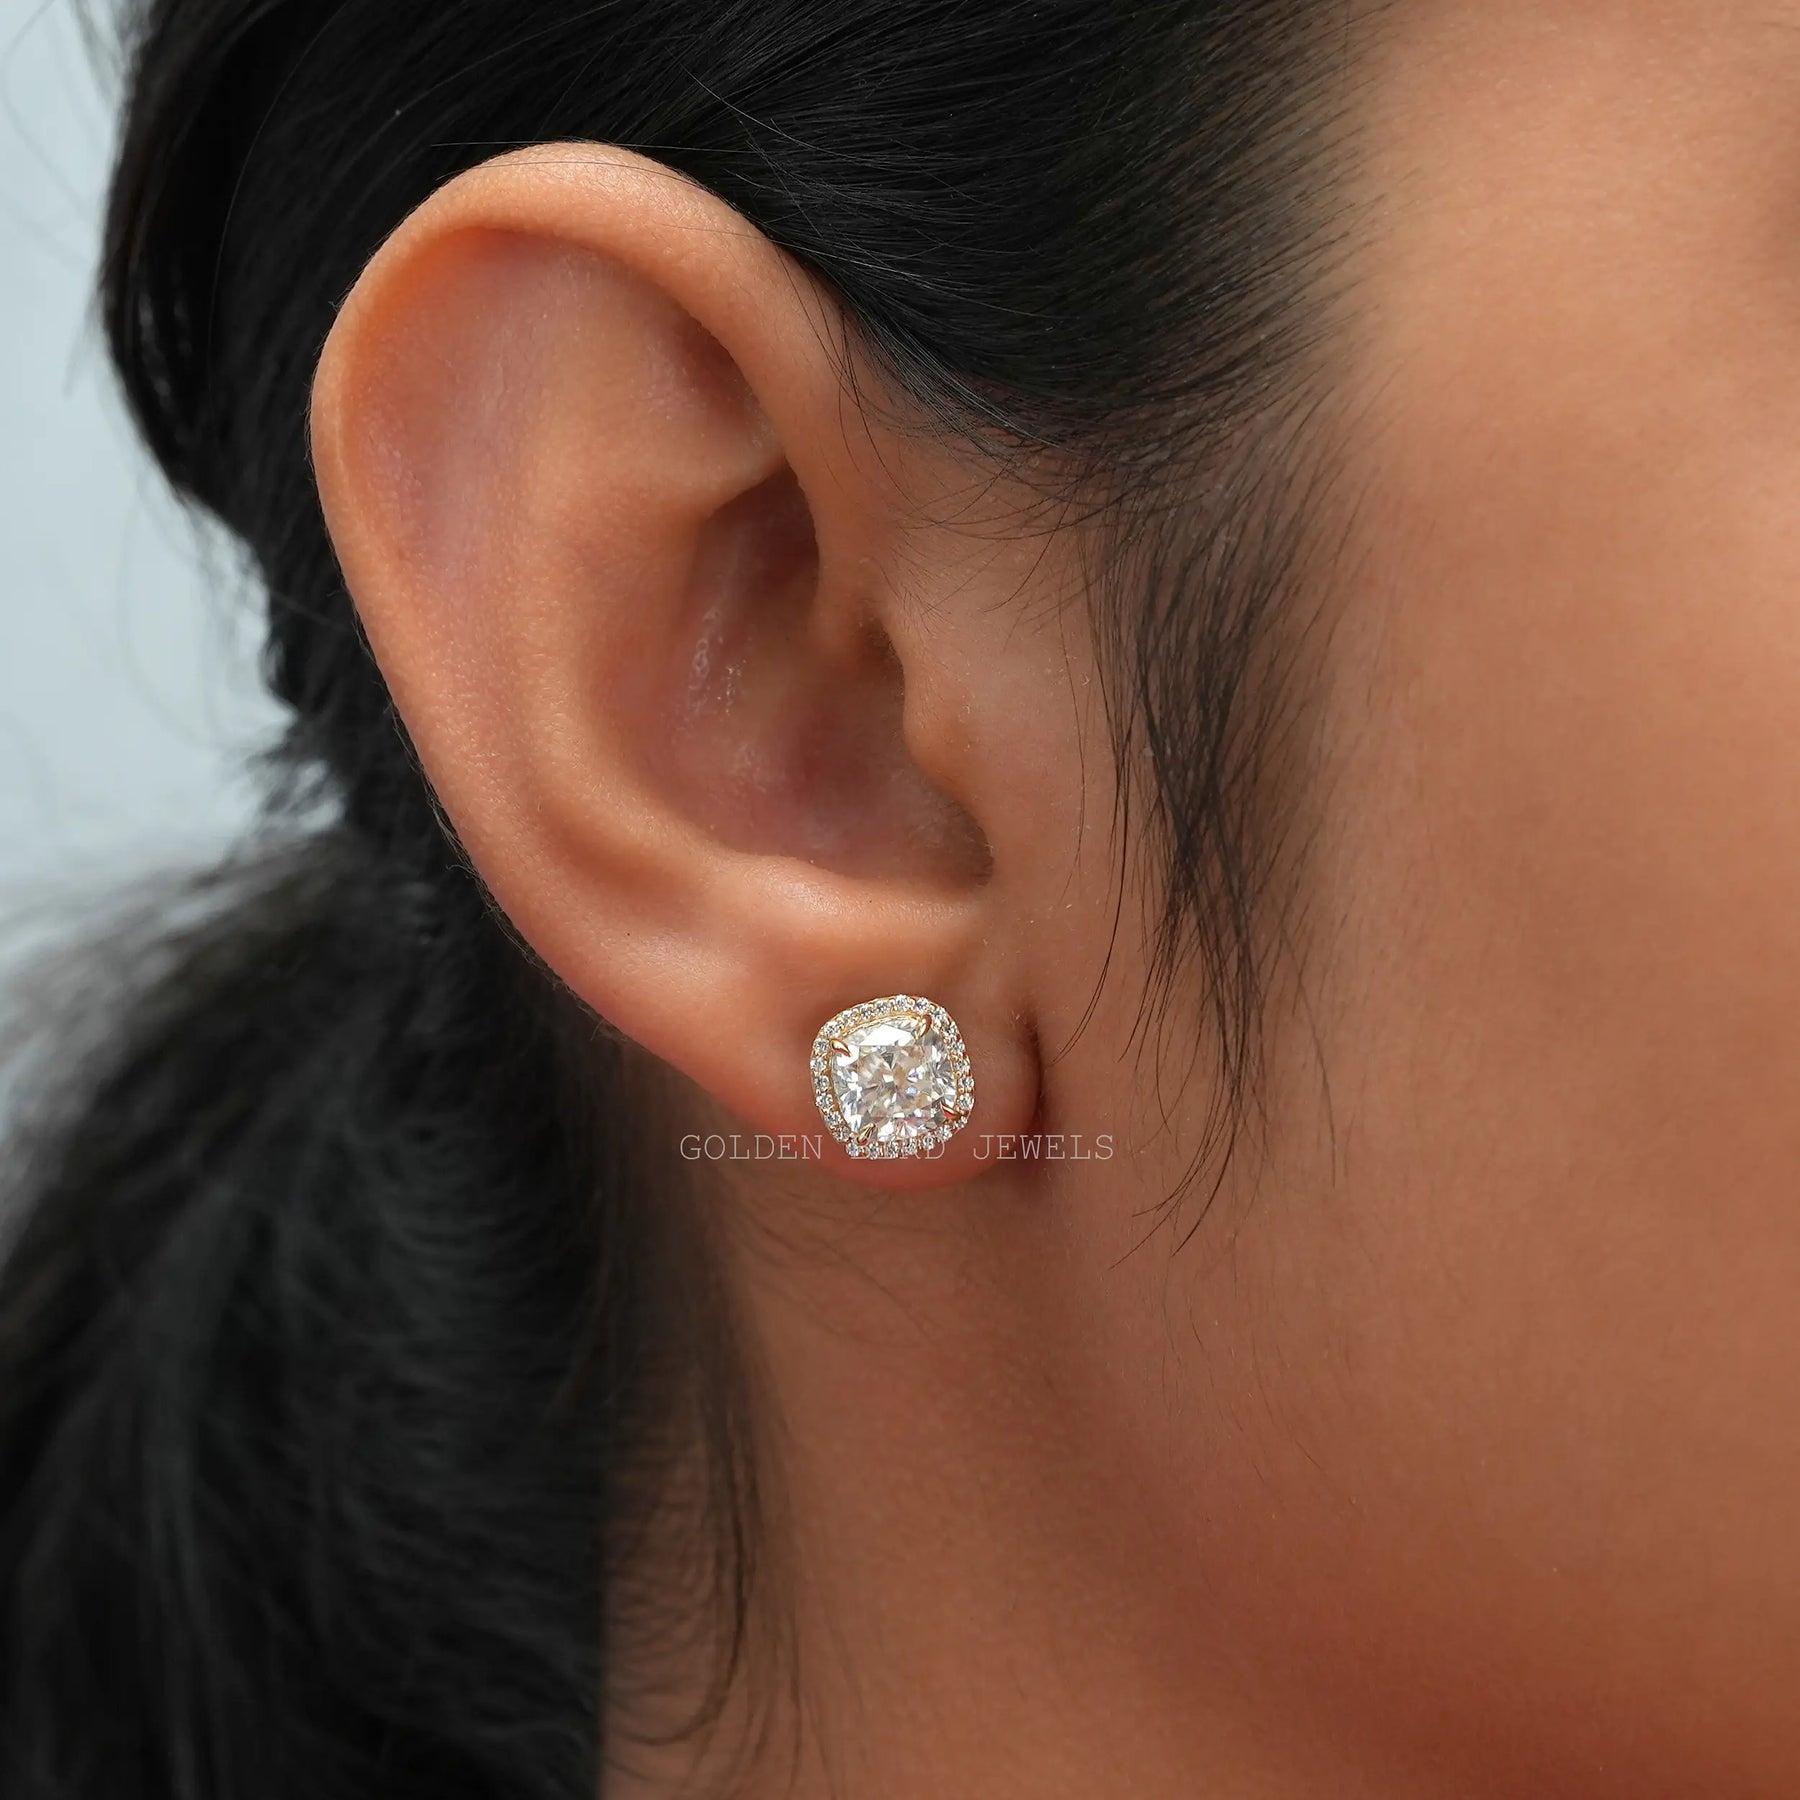 [This cushion cut moissanite stud earrings made of side round cut stones]-[Golden Bird Jewels]